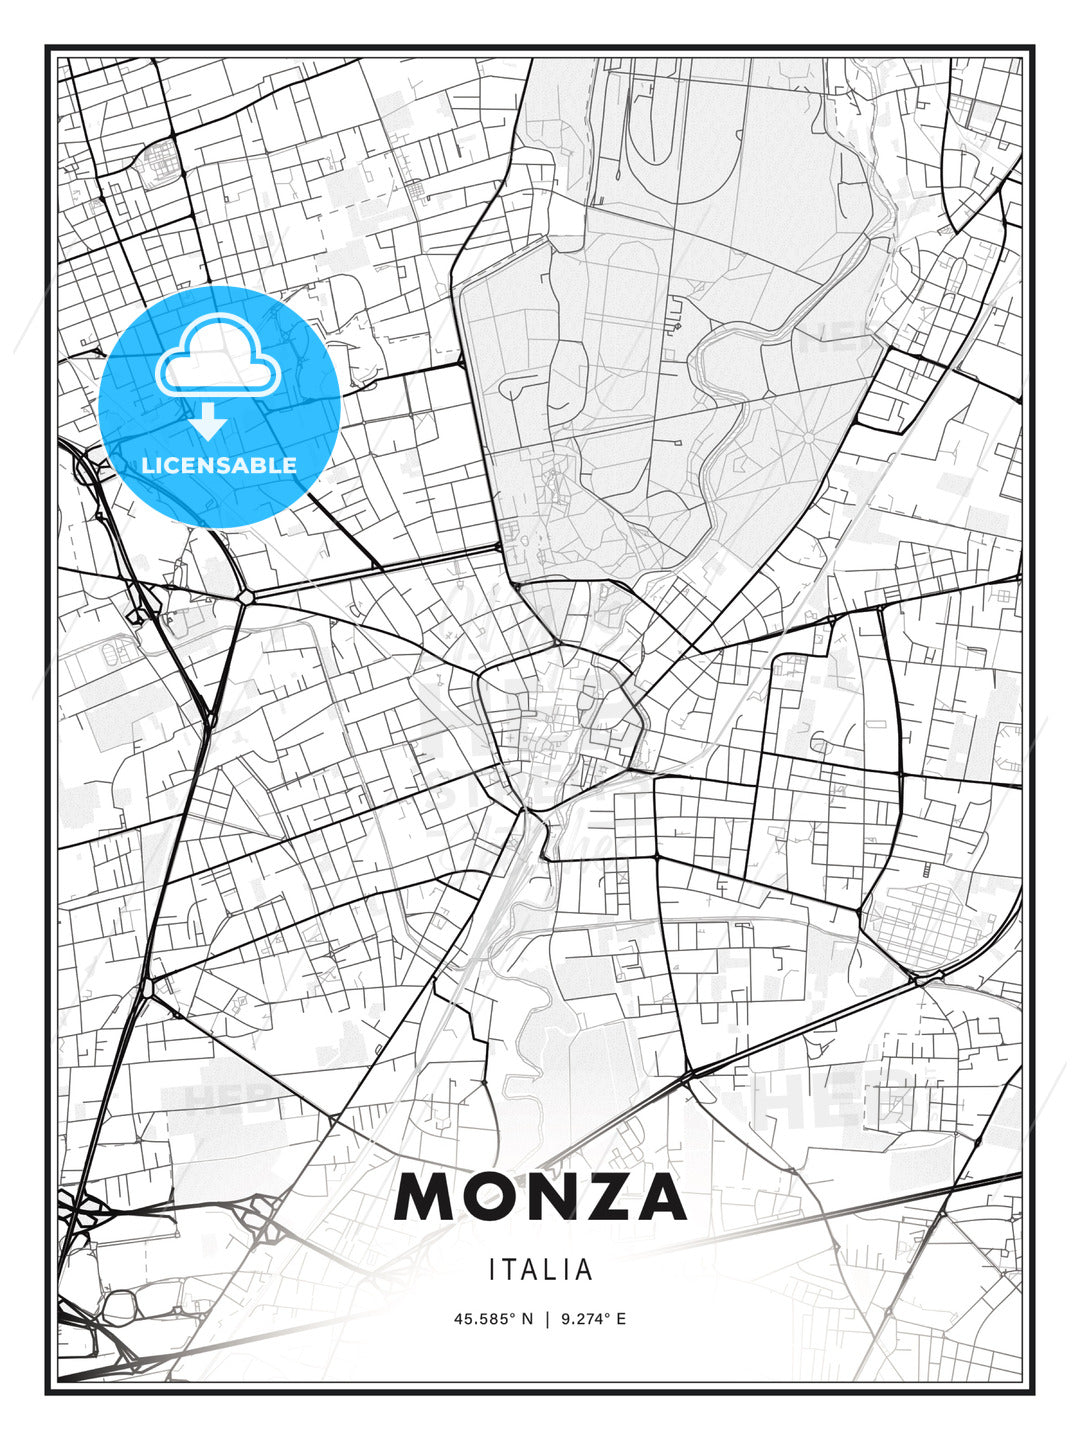 Monza, Italy, Modern Print Template in Various Formats - HEBSTREITS Sketches